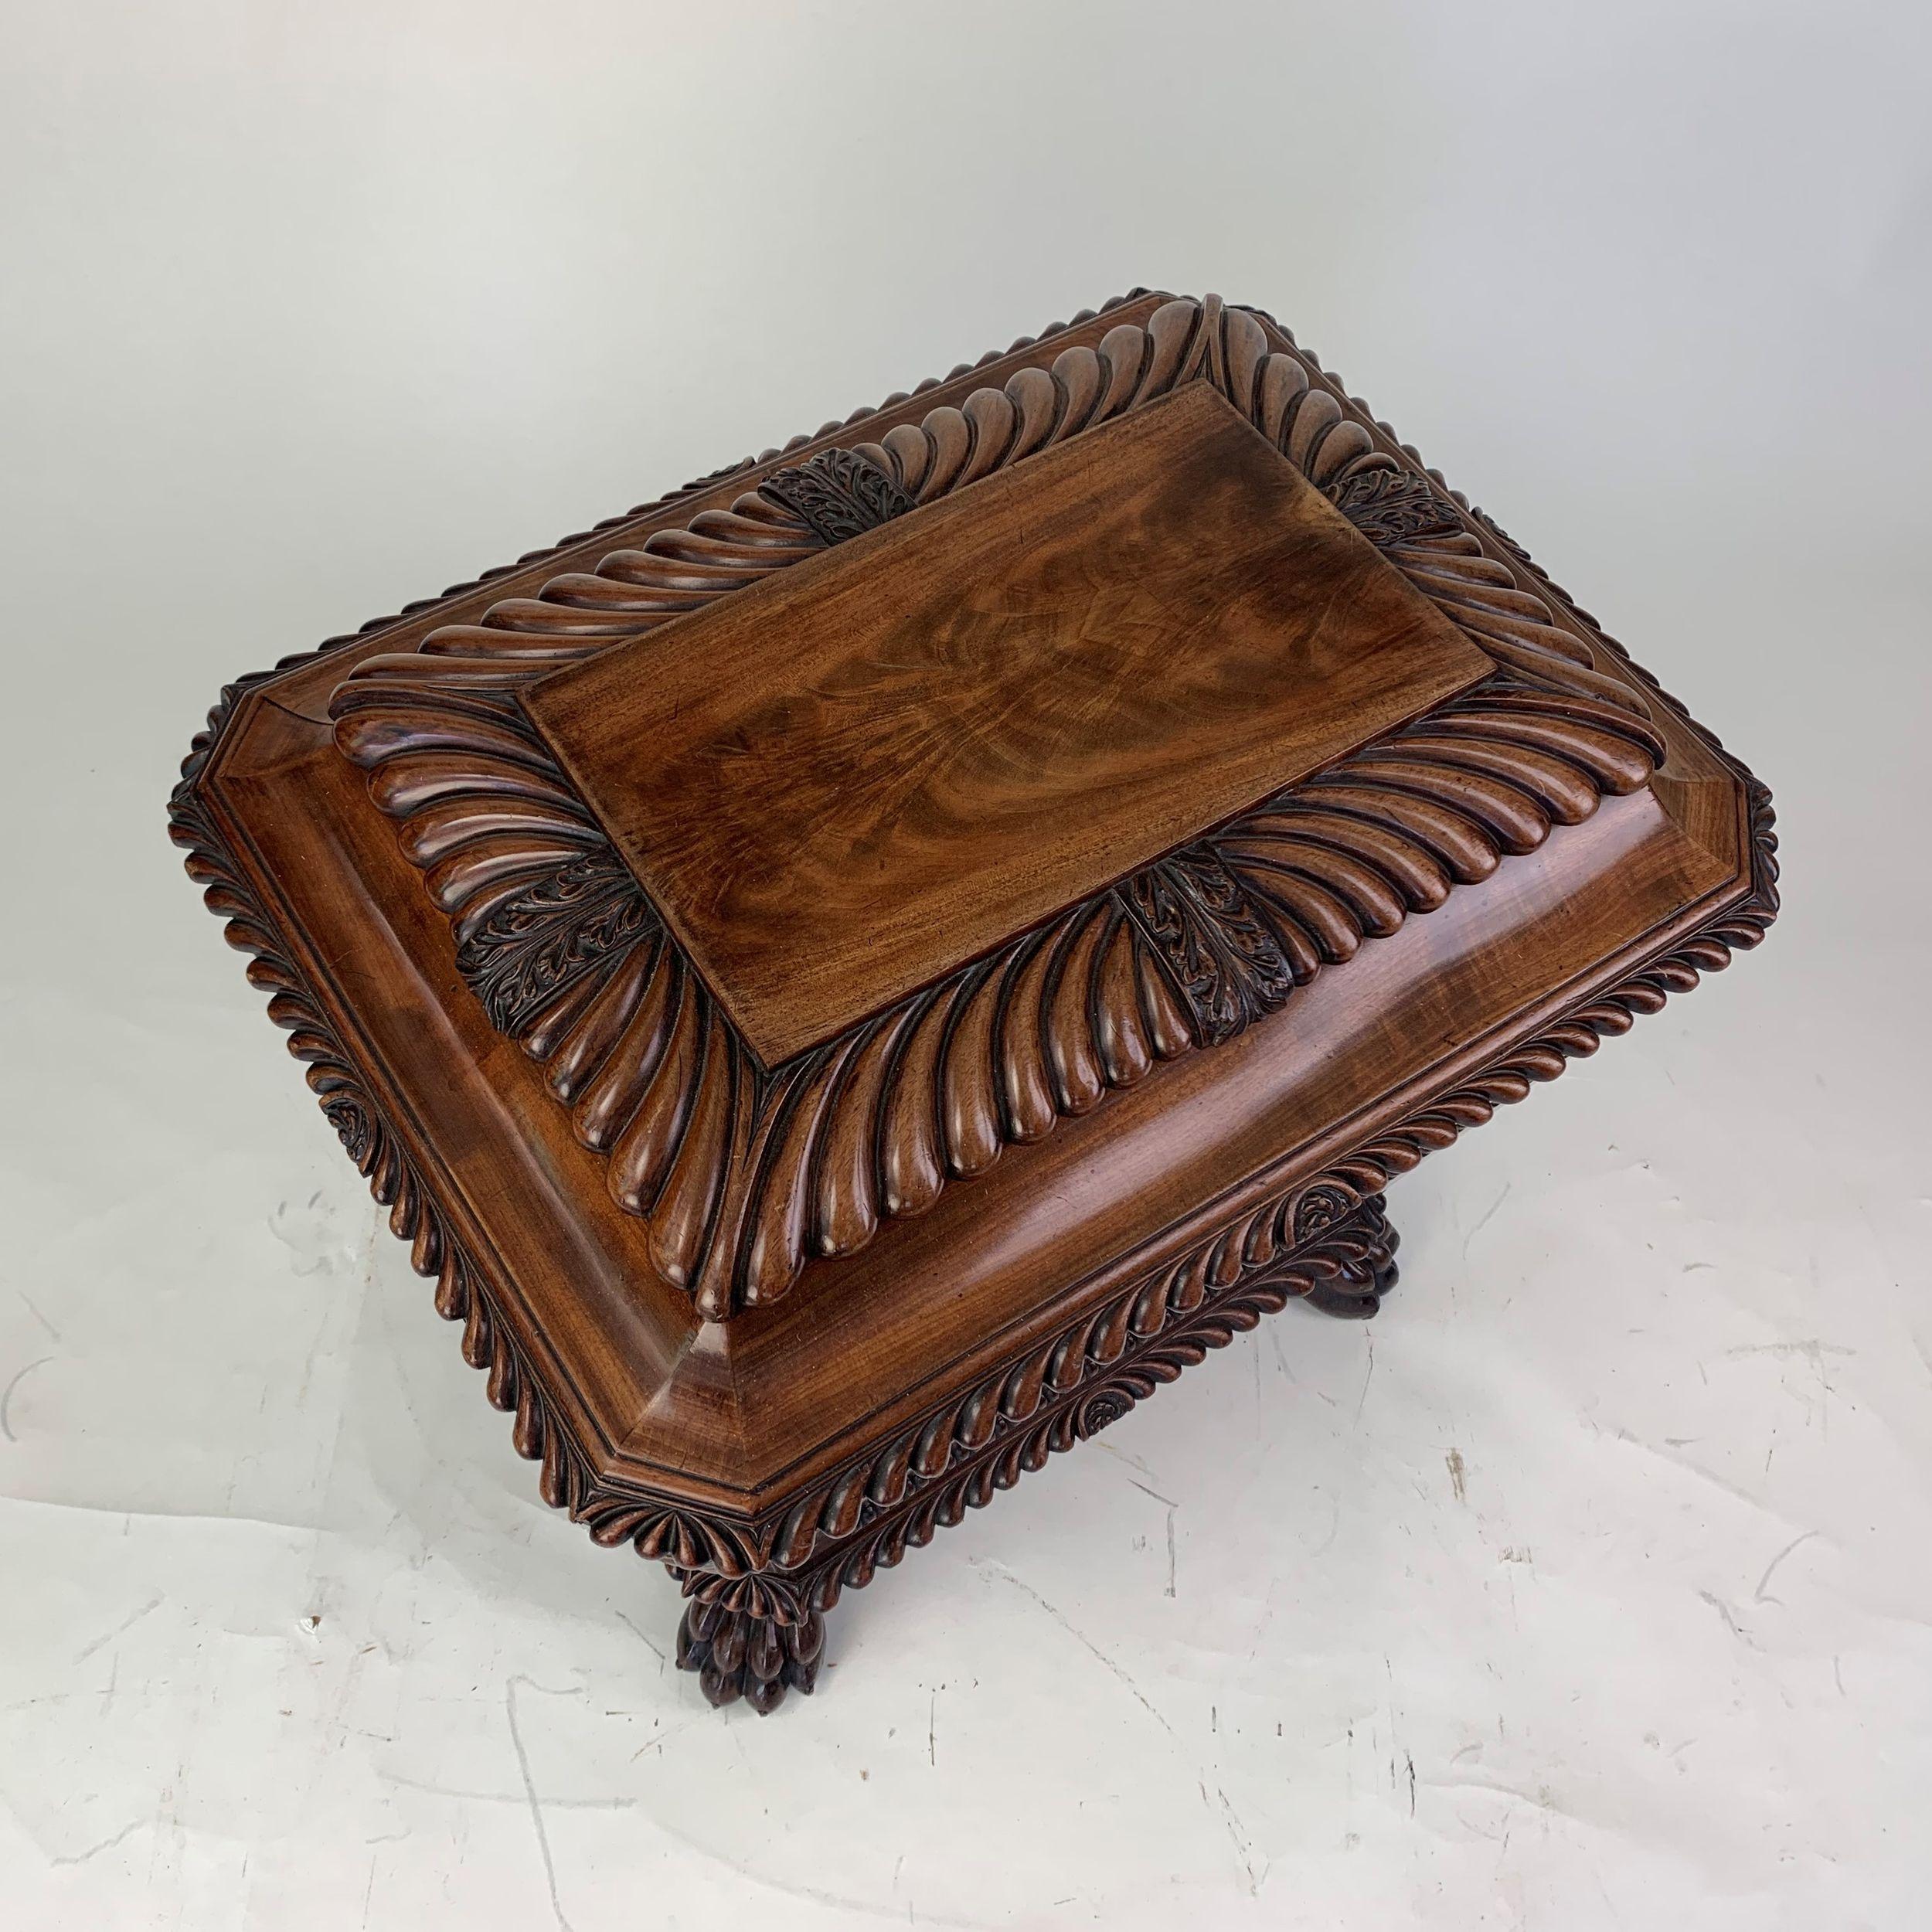 An exceptional and outstanding quality Regency period sarcophagus shaped mahogany wine cooler attributed to Gillows, constructed in the most beautifully figured mahogany and carved all round with symmetrical gadrooning, interspersed with foliate